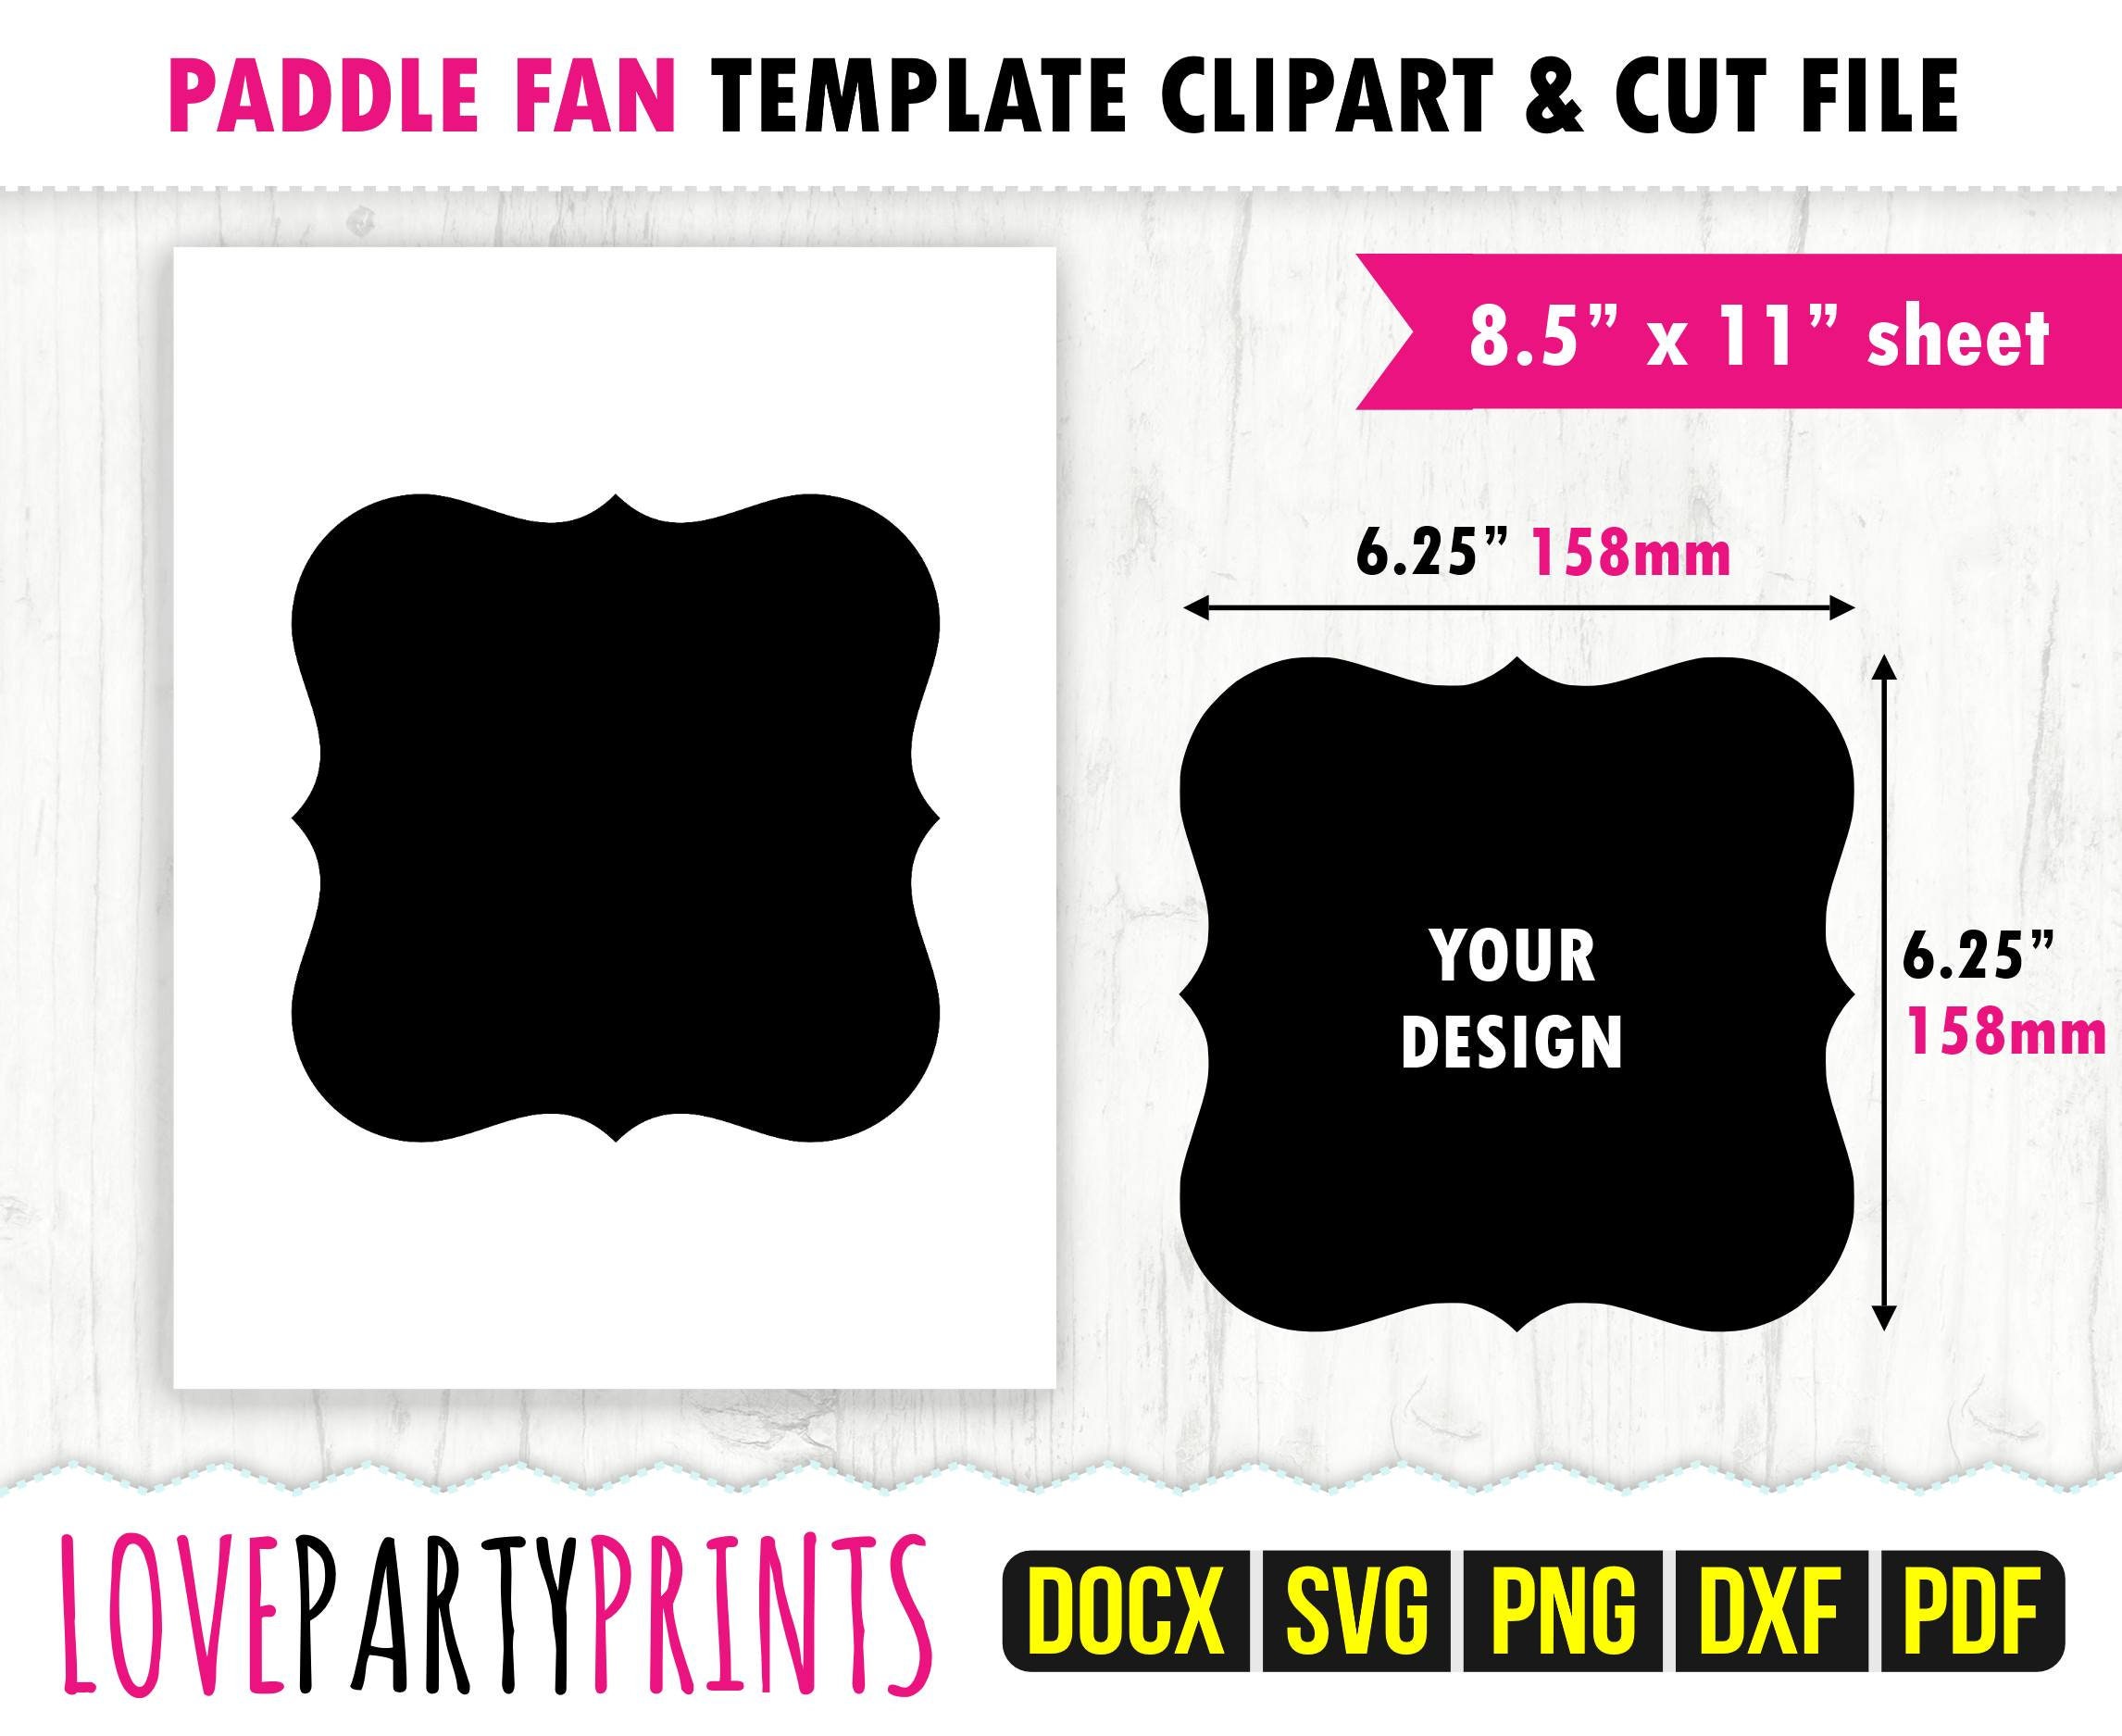 45-free-printable-paddle-fan-template-heritagechristiancollege